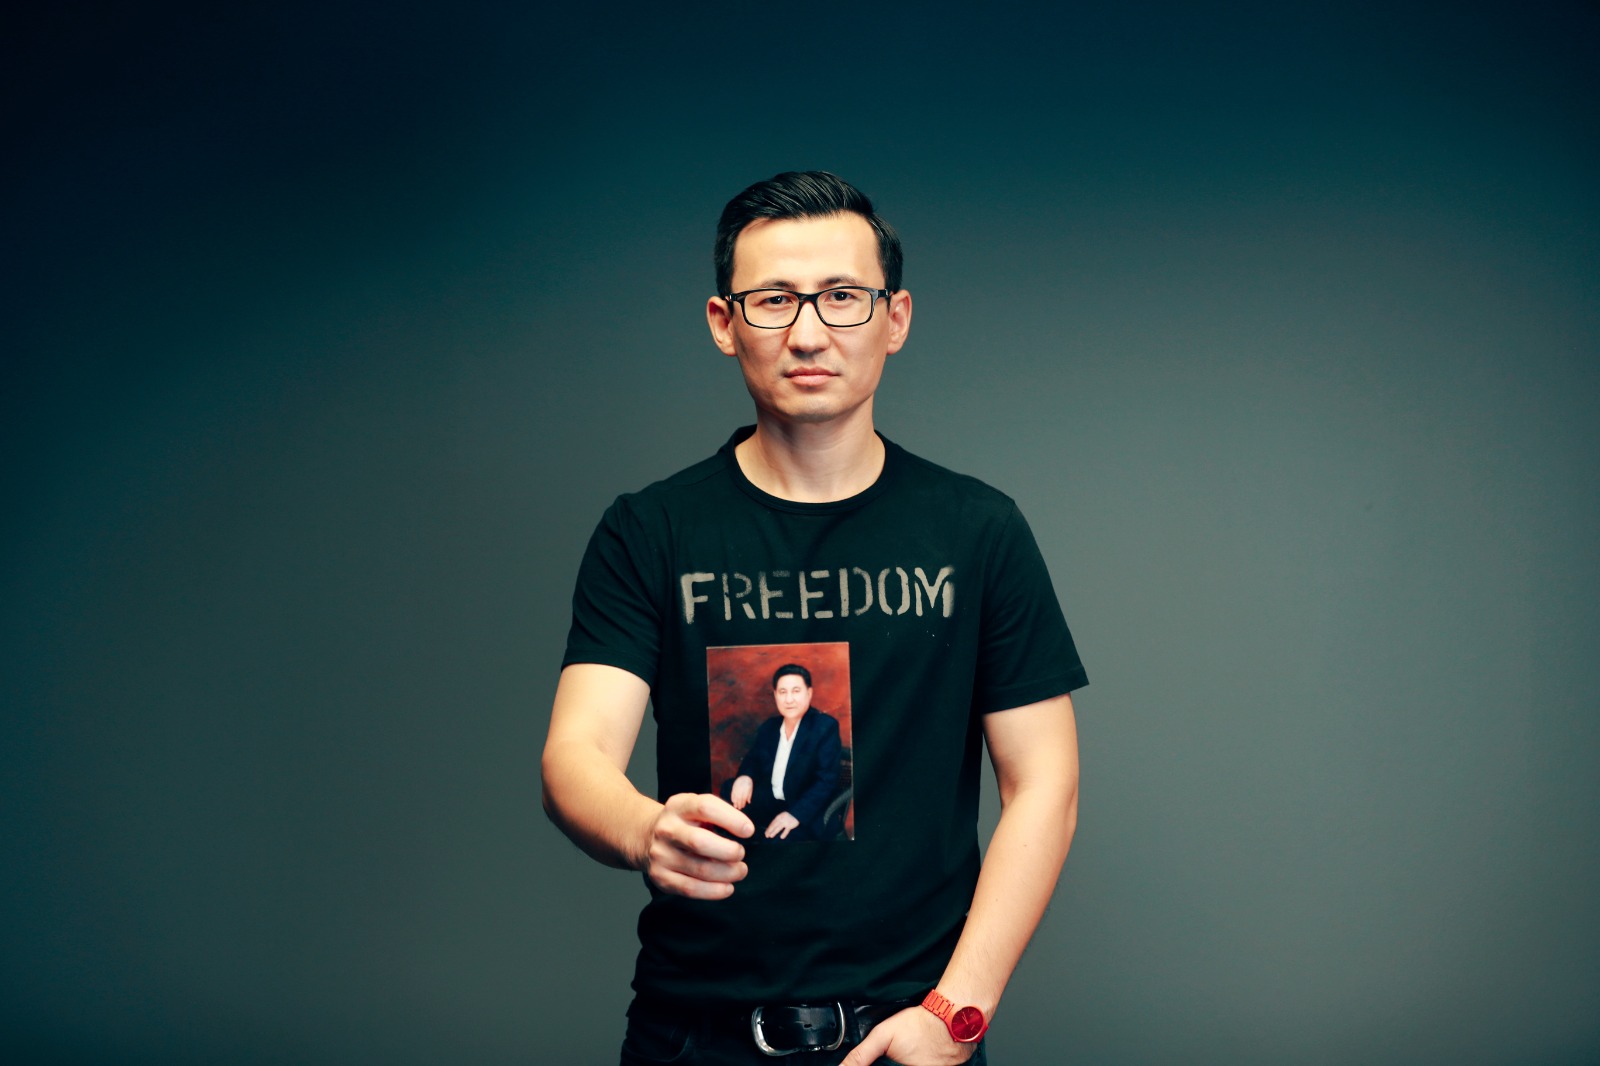 PHOTO: Kuzzat Altay, a Uighur-American activist and entrepreneur, believes his father suffered in a Chinese vocational center. Altay says he has struggled to maintain contact with him.